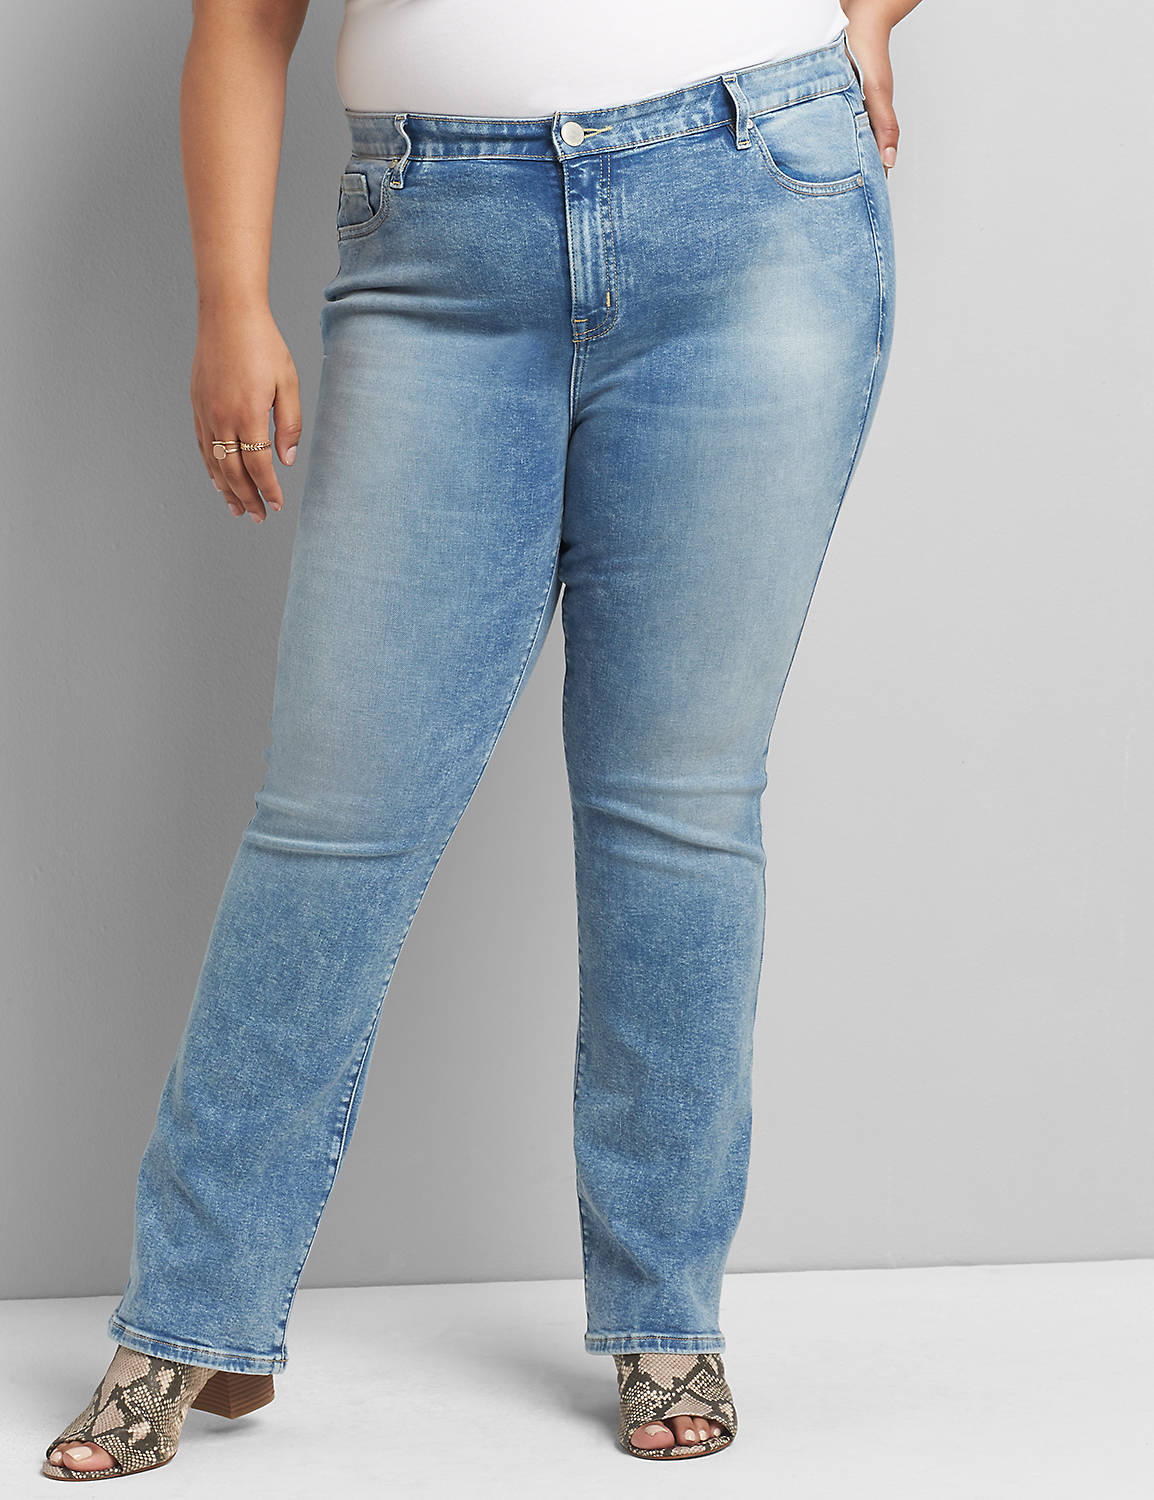 STRAIGHT FIT HIGHER RISE STRAIGHT BRIGHT BLUE WASH 1119508:Light Denim:12 Product Image 1